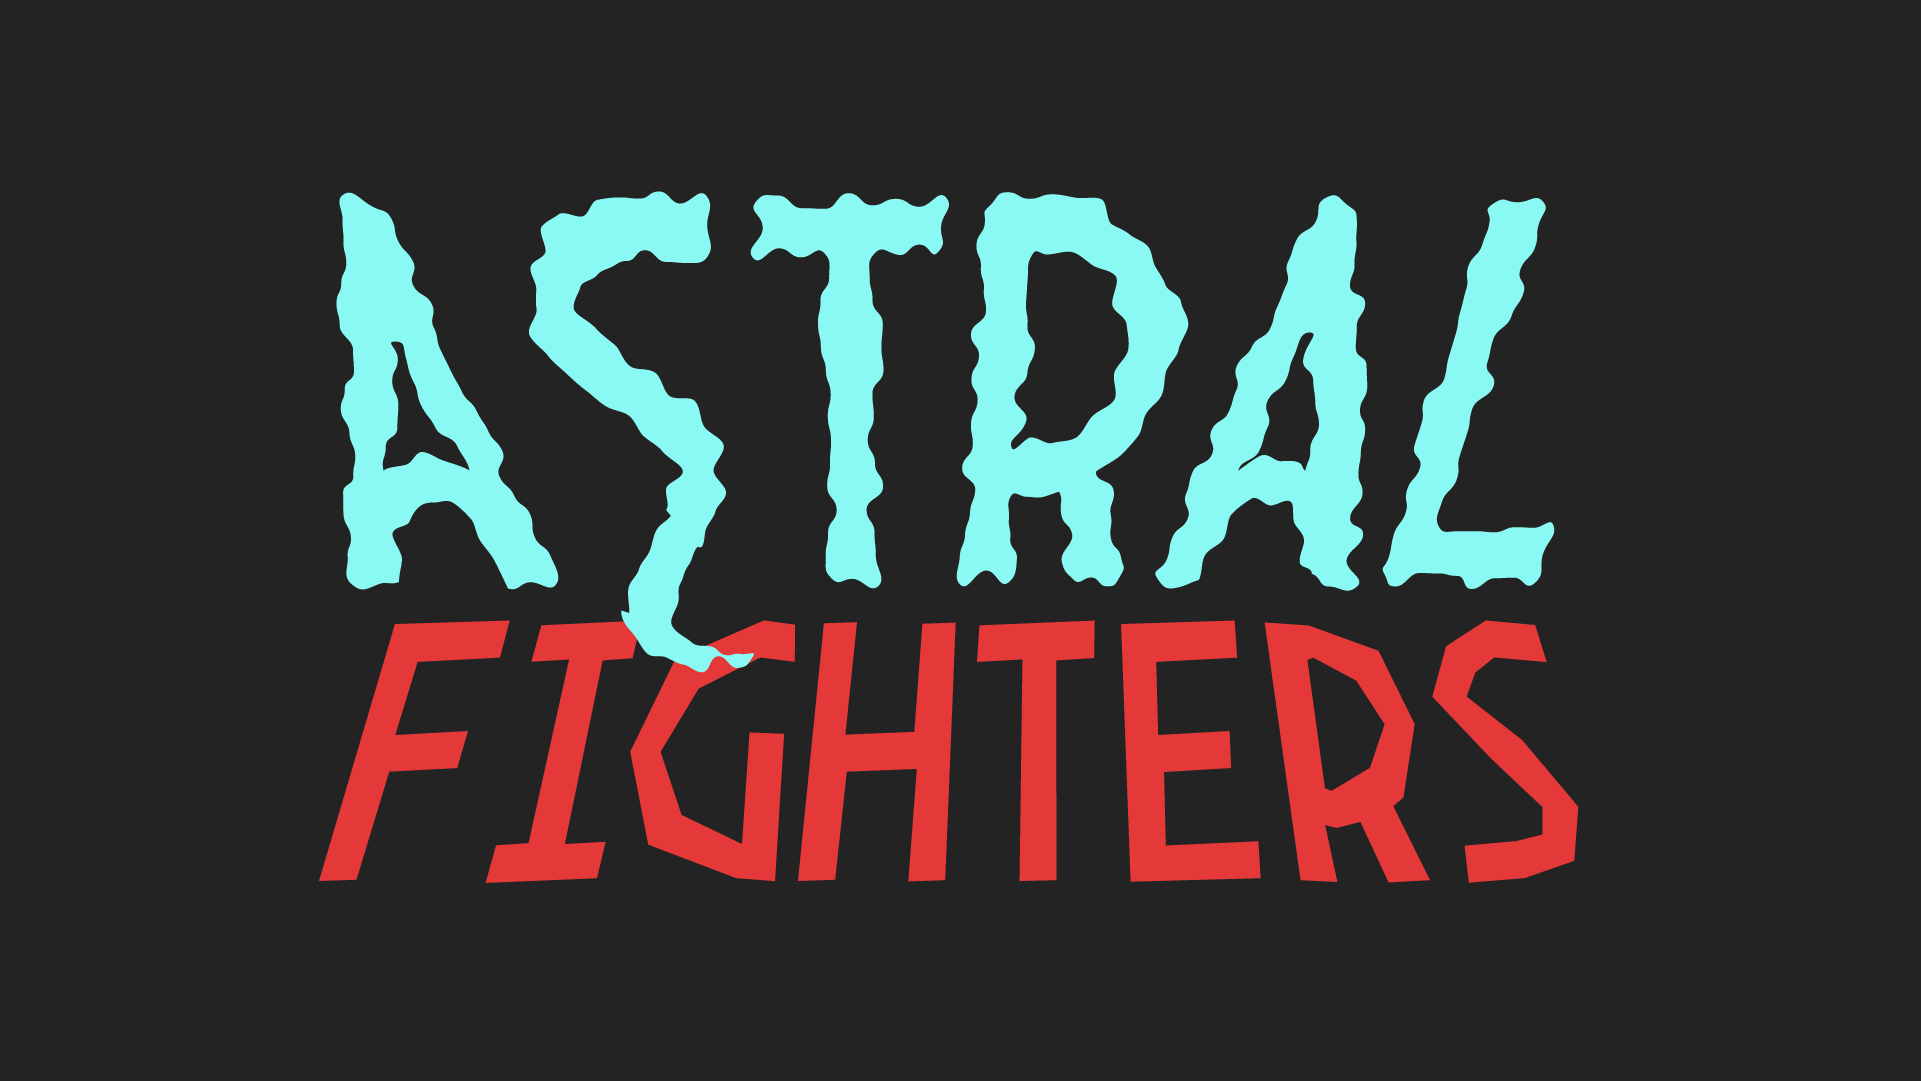 Astral Fighters